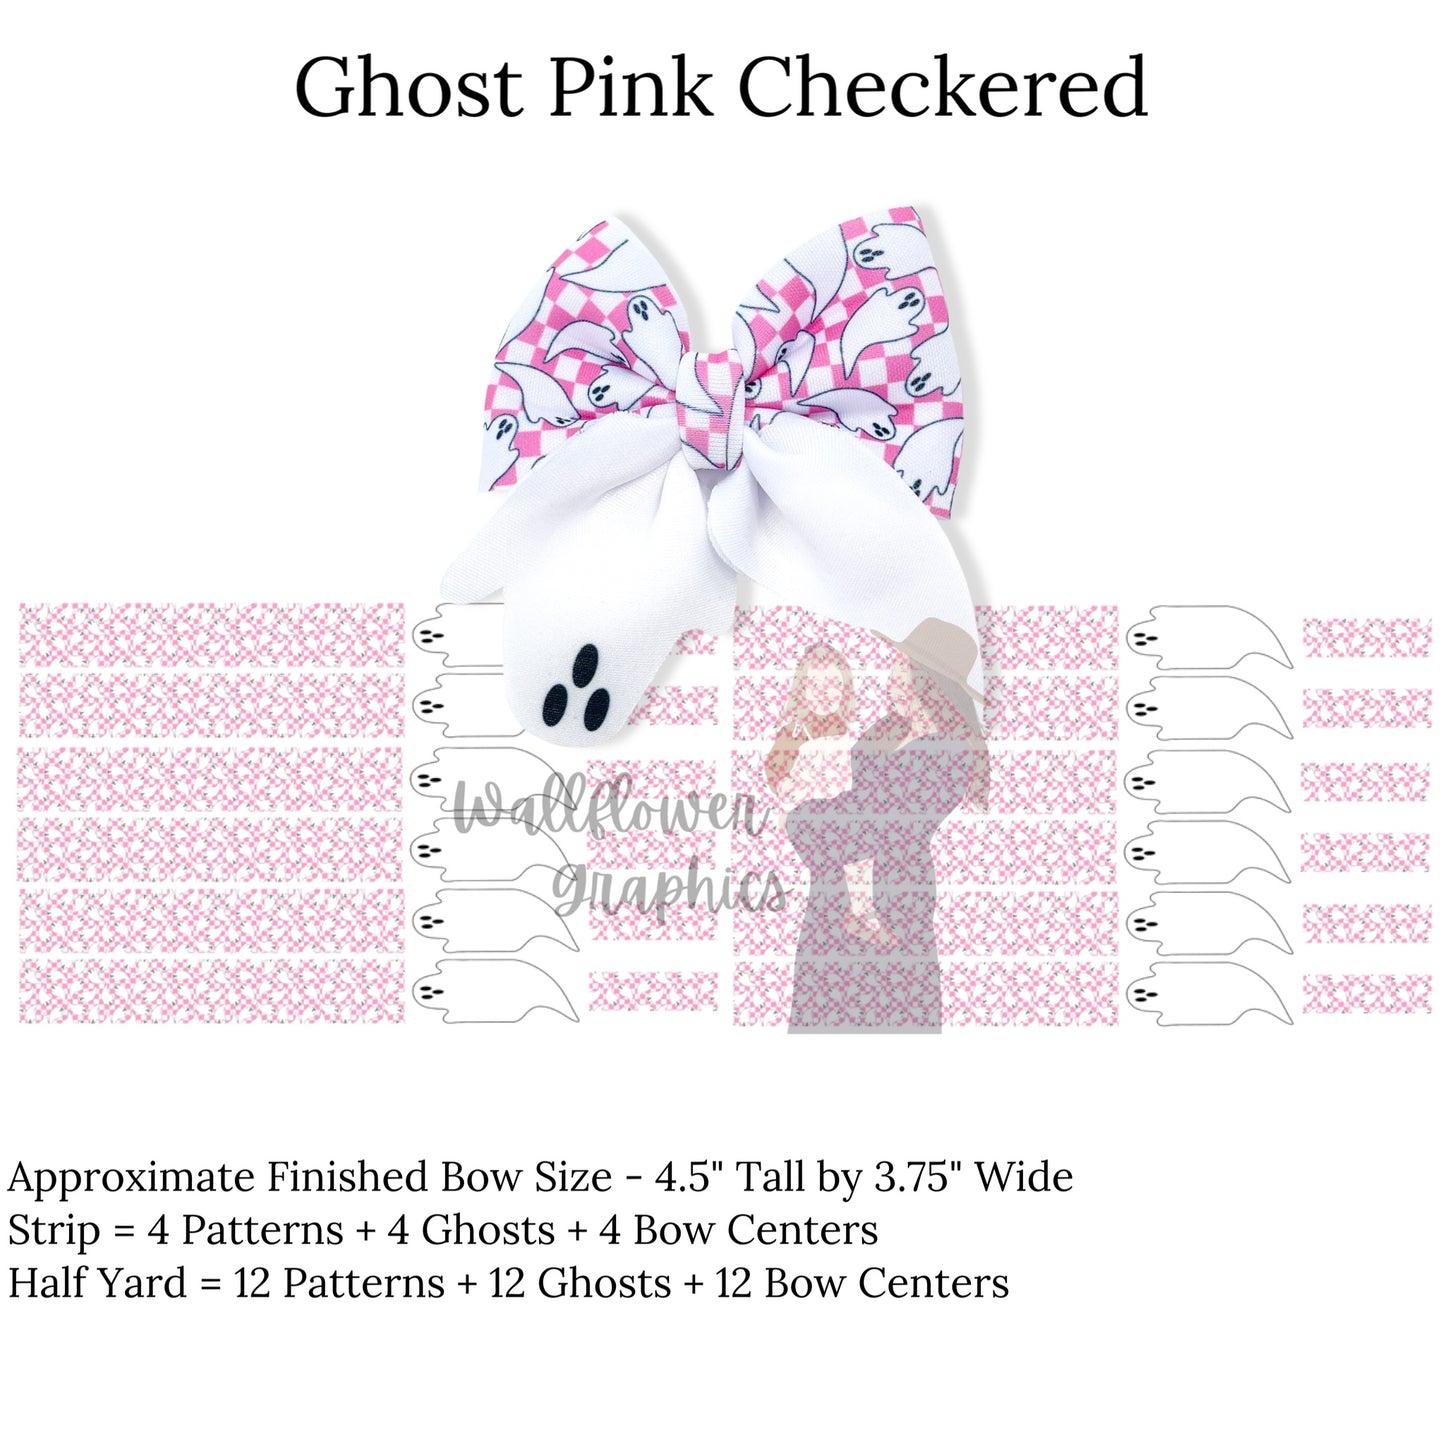 Wallflower graphics Halloween themed ghost neoprene sailor bows - ghost pink checkered.